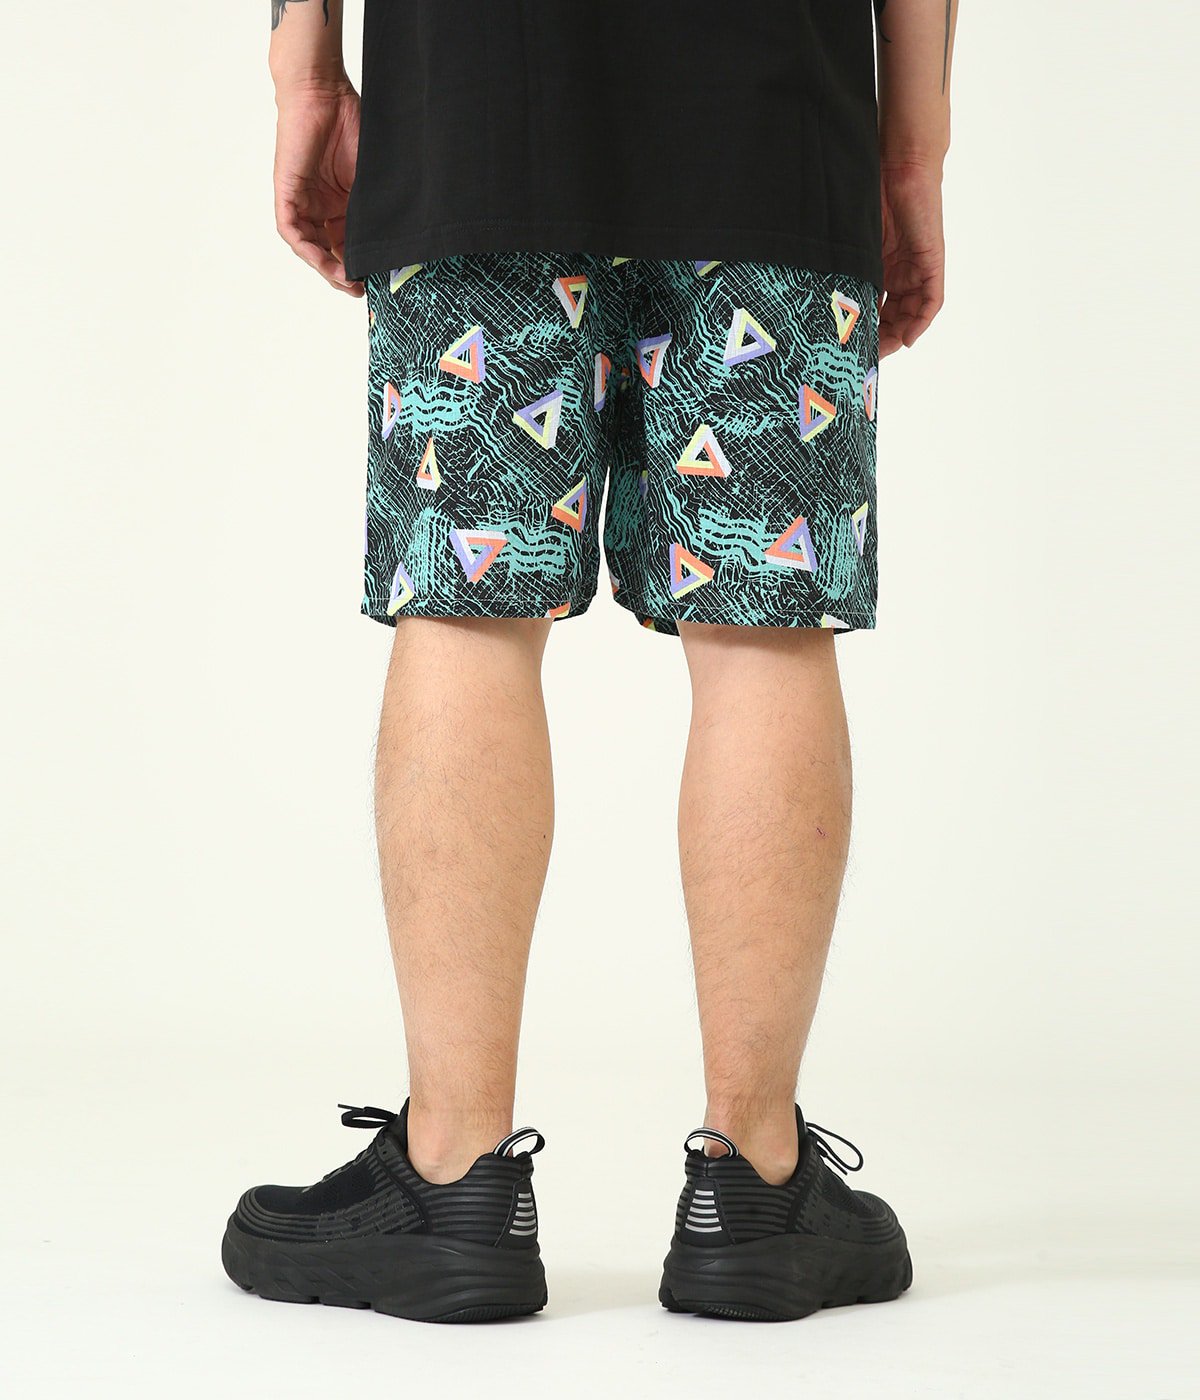 SPACE TRIANGLE SHORTS